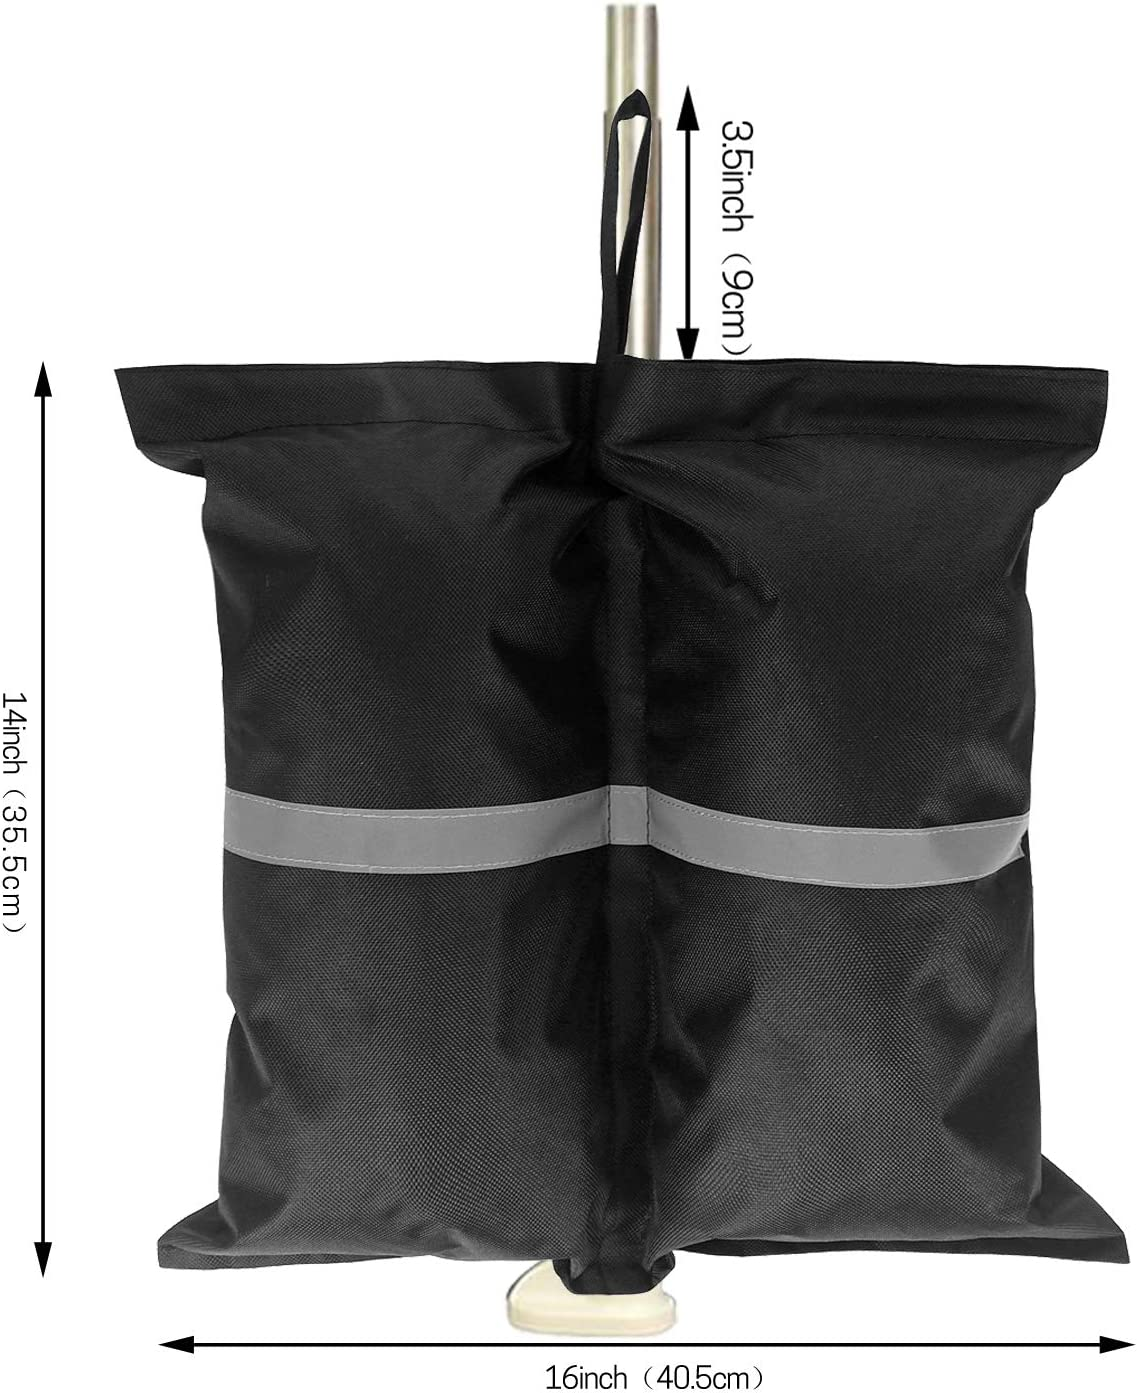 Canopy Weight Bags for Pop up Tent, 4Pcs/Pack Leg Weights Sand Bags for Instant Outdoor Sun Shelter Canopy Legs, Heavy Duty Stability Sandbag Weighted Feet Bag (Black with Reflective Strip)